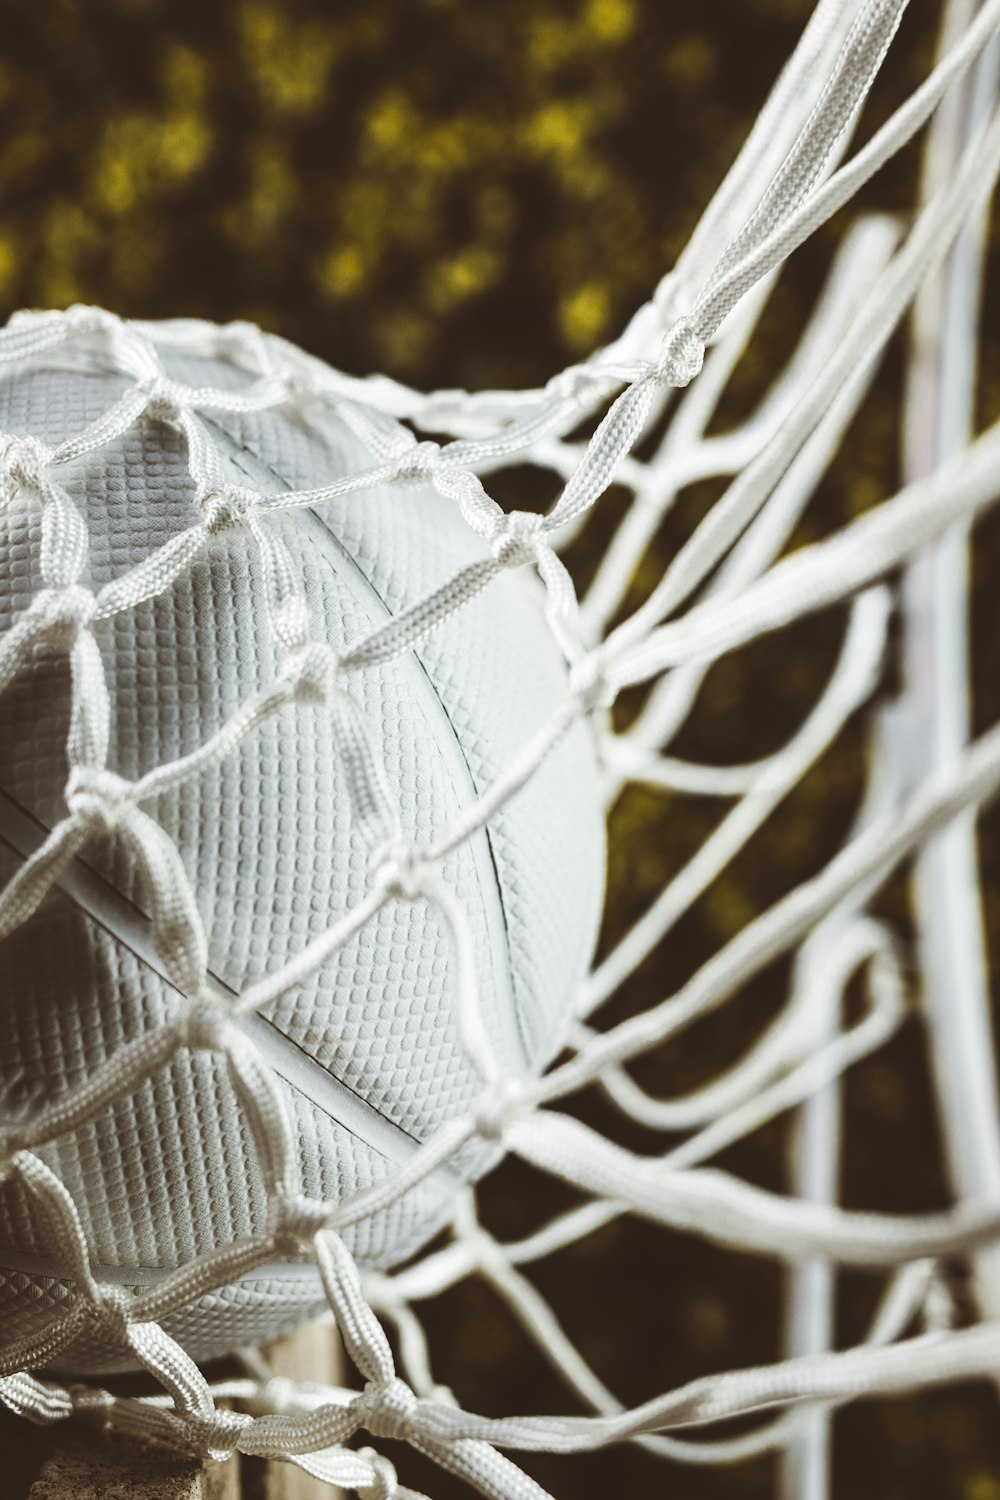 white ball in net in close-up photo